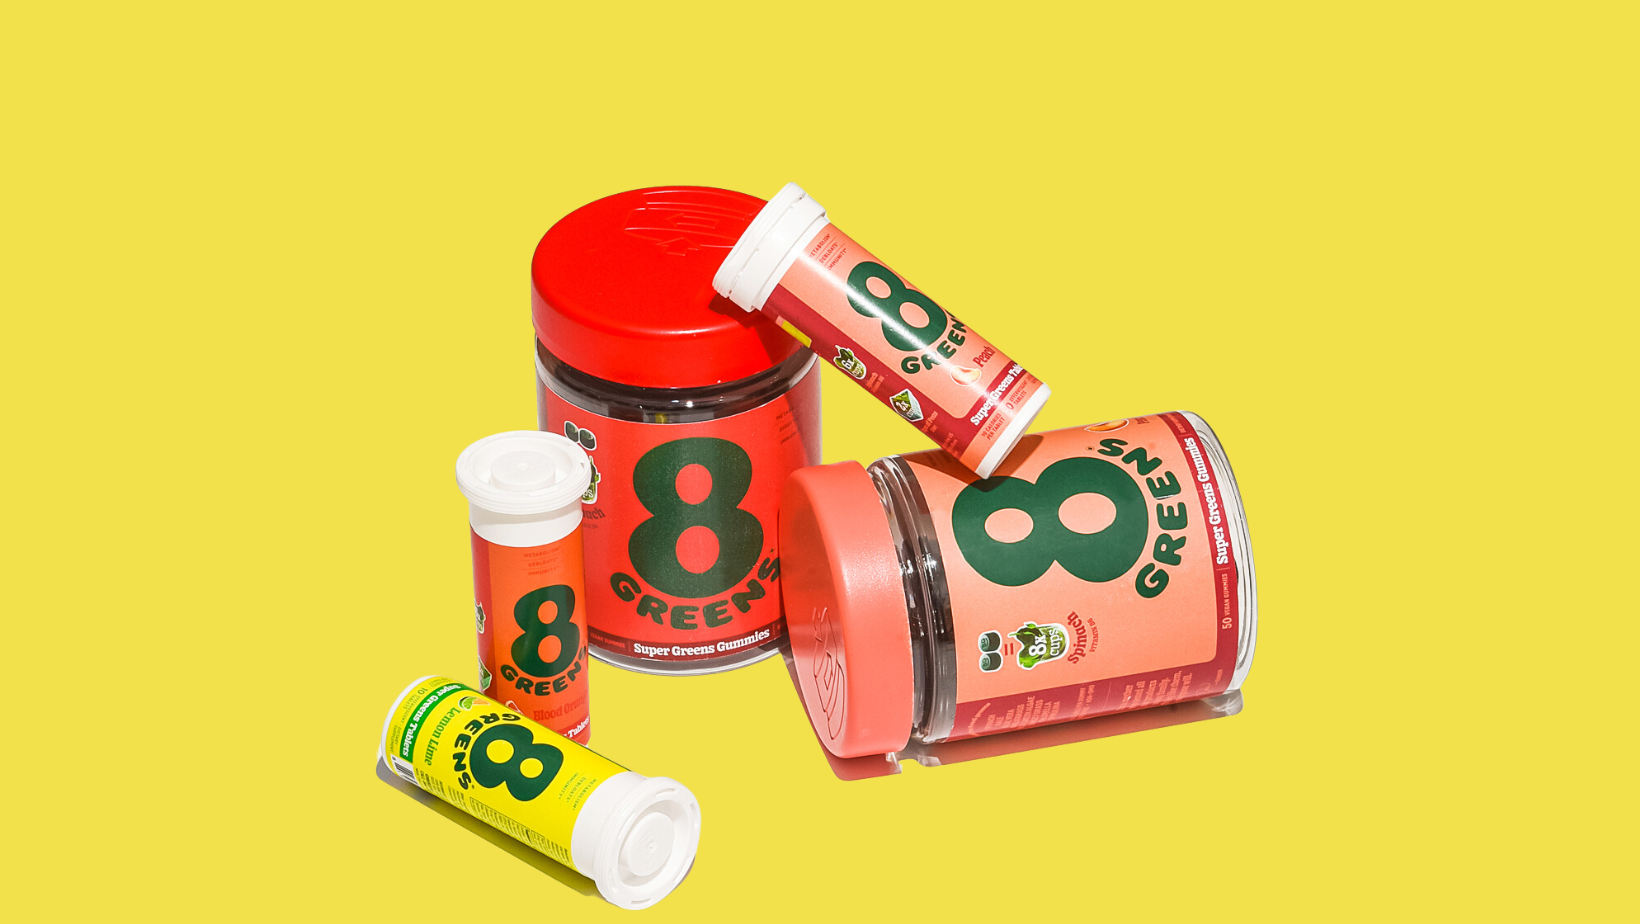 8 Greens Brand Refresh Makes Superfoods More Visually Appealing